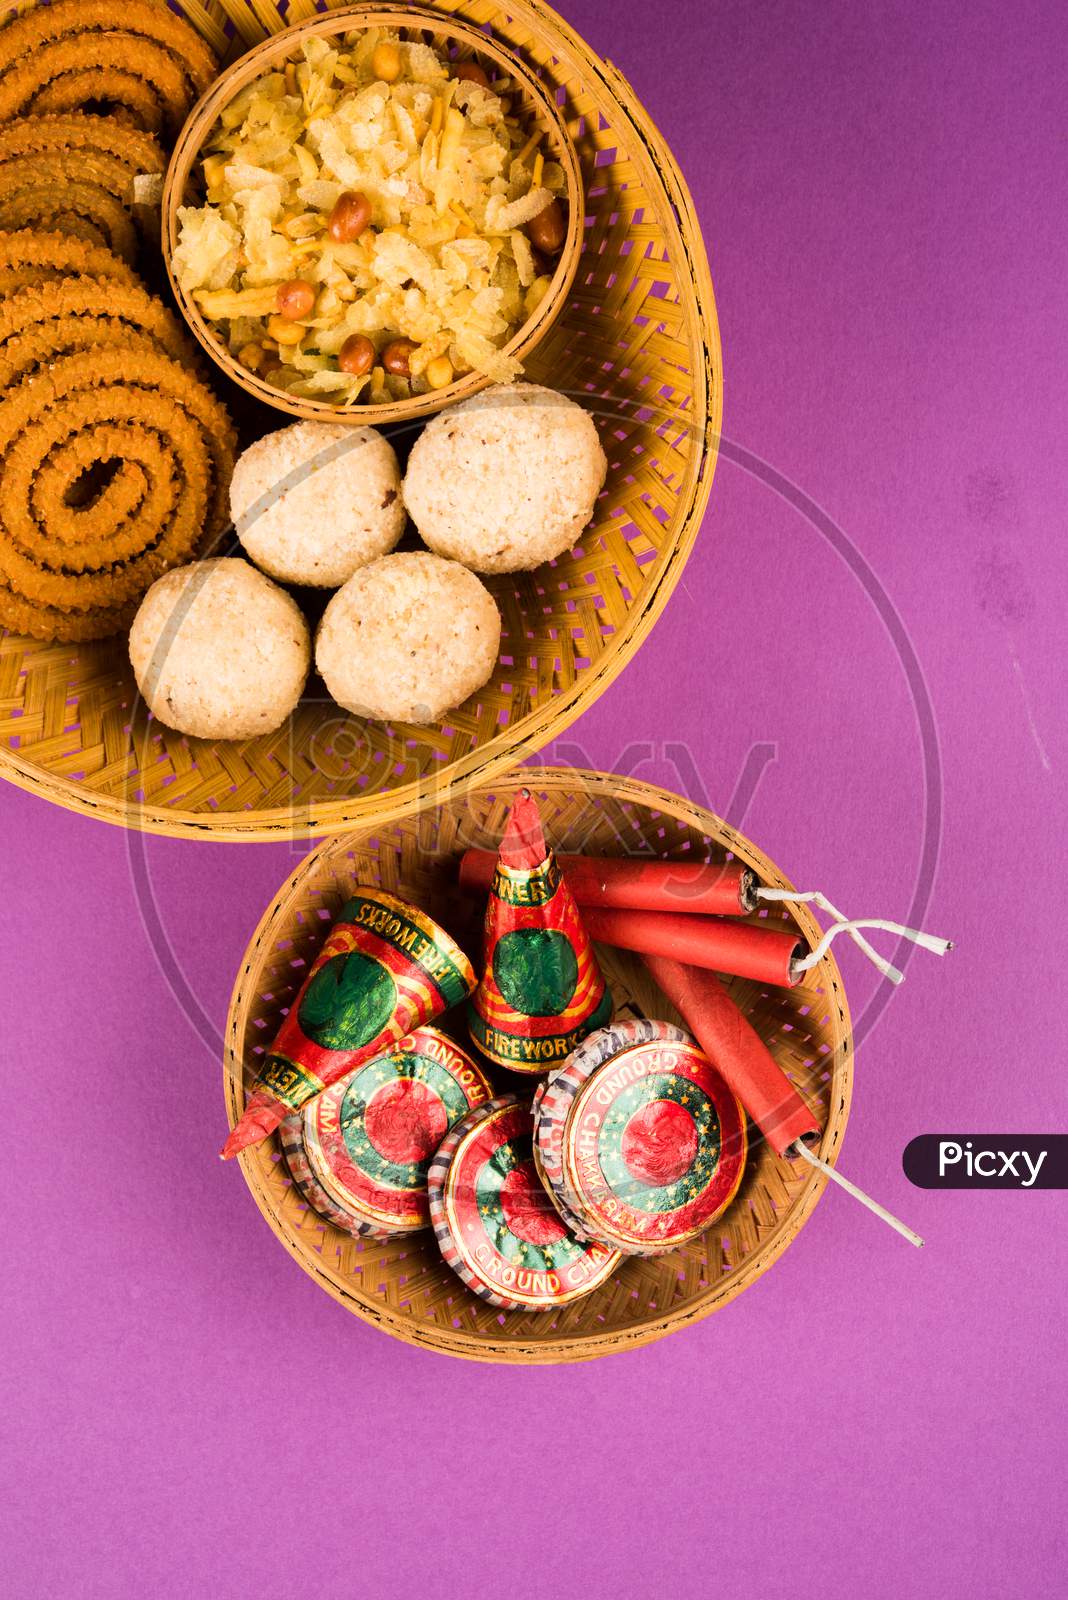 diwali food / snacks /sweets with fire crackers isolated